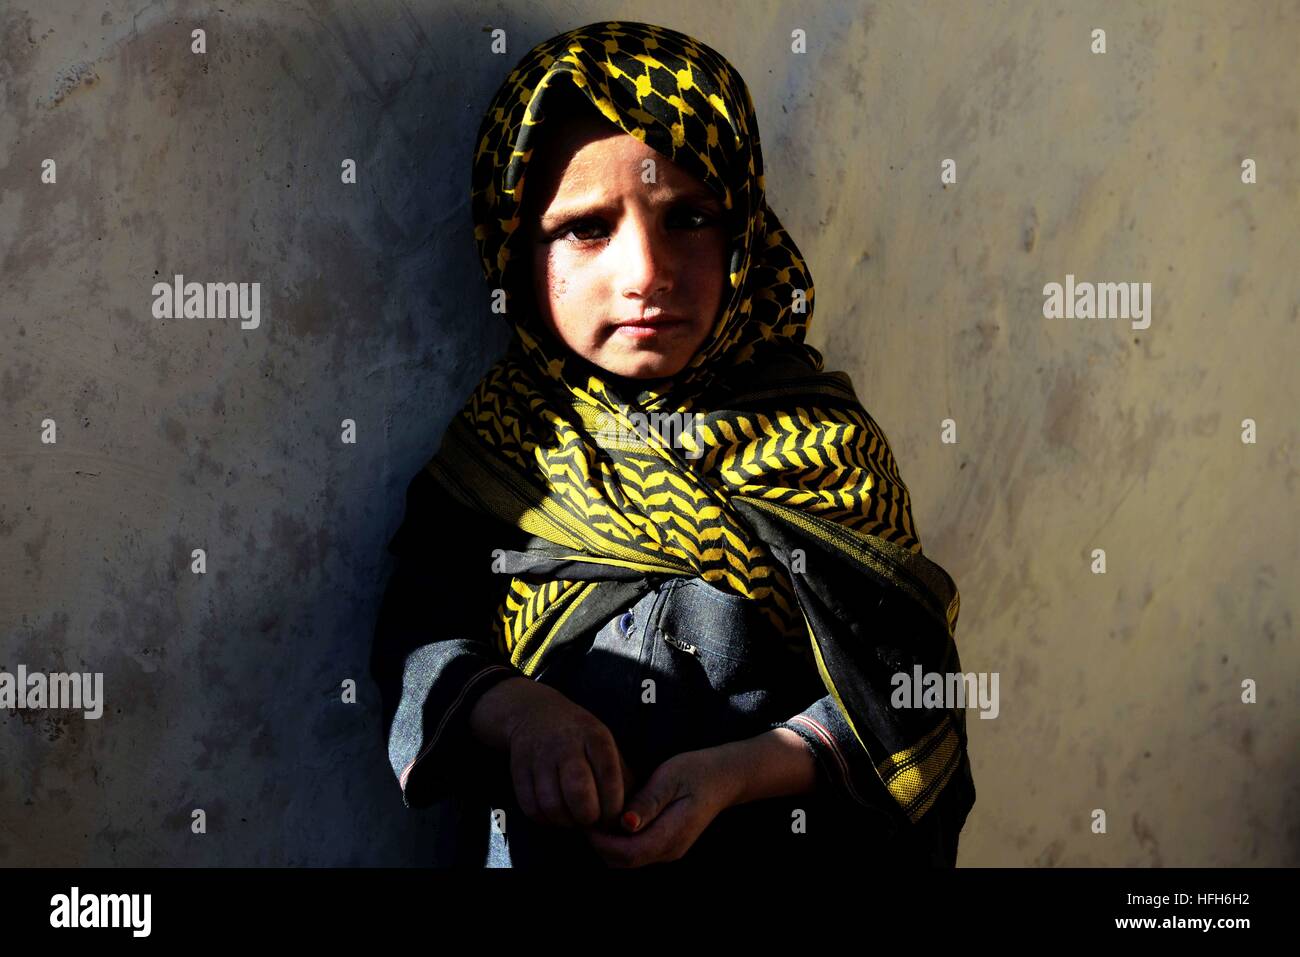 Beijing, Afghanistan's Zabul province. 26th Dec, 2016. An Afghan displaced child stands outside her tent in Qalat city, capital of southern Afghanistan's Zabul province, Dec. 26, 2016. More than one million people have to flee their home due to conflicts in the country, according to officials. © Sanaullah Seiam/Xinhua/Alamy Live News Stock Photo